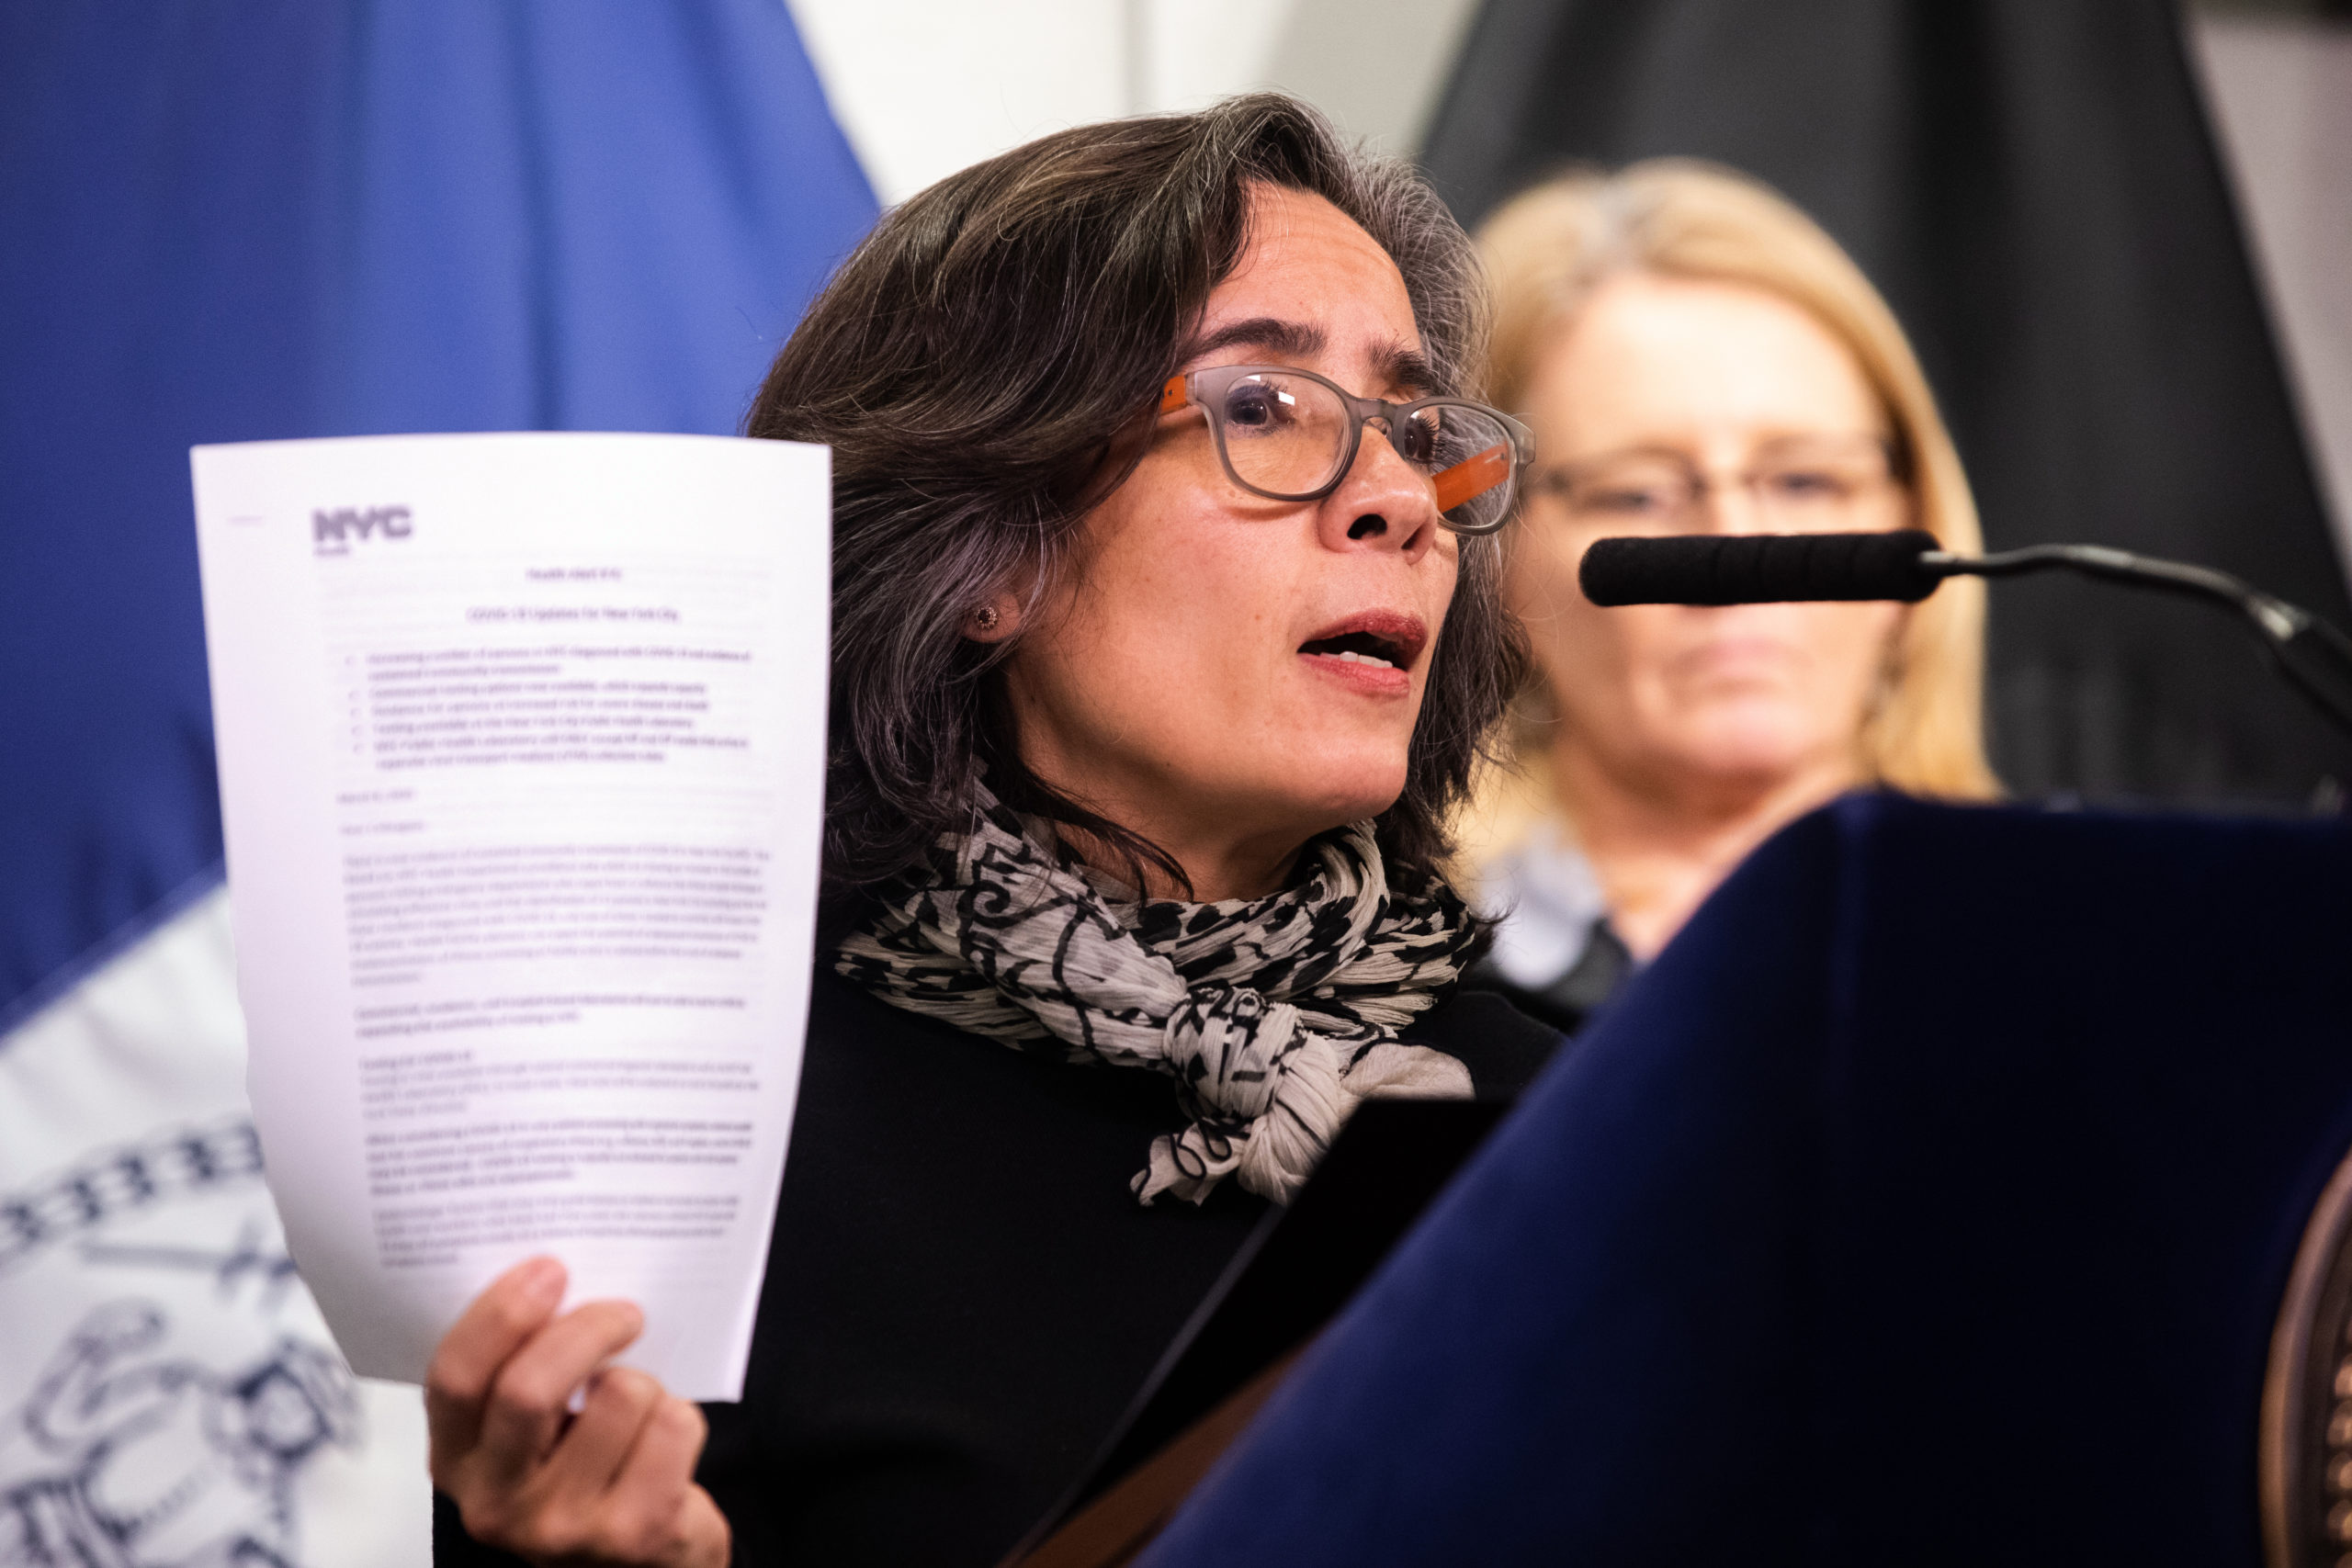 NYC Department of Health Commissioner Dr. Oxiris Barbot addresses the press on coronavirus at a March 9, 2020 briefing at NYC Emergency Management headquarters. Photo: Paul Frangipane/Brooklyn Eagle